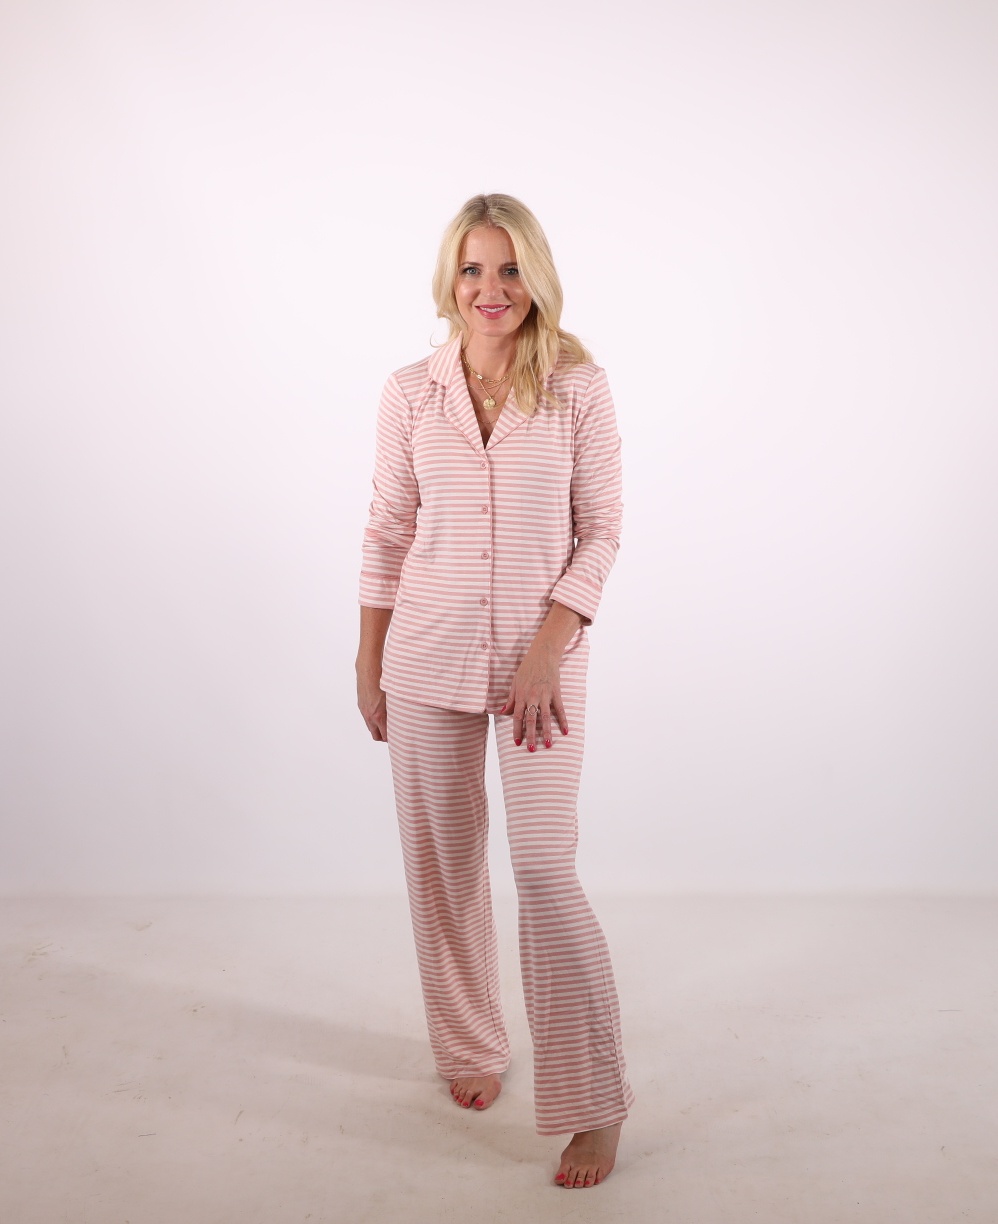 Nordstrom Sale Favorites, Fashion Blogger Erin Busbee Of Busbee Style Wearing Pink Striped Pajamas By Nordstrom In Her Studio In Telluride, Colorado